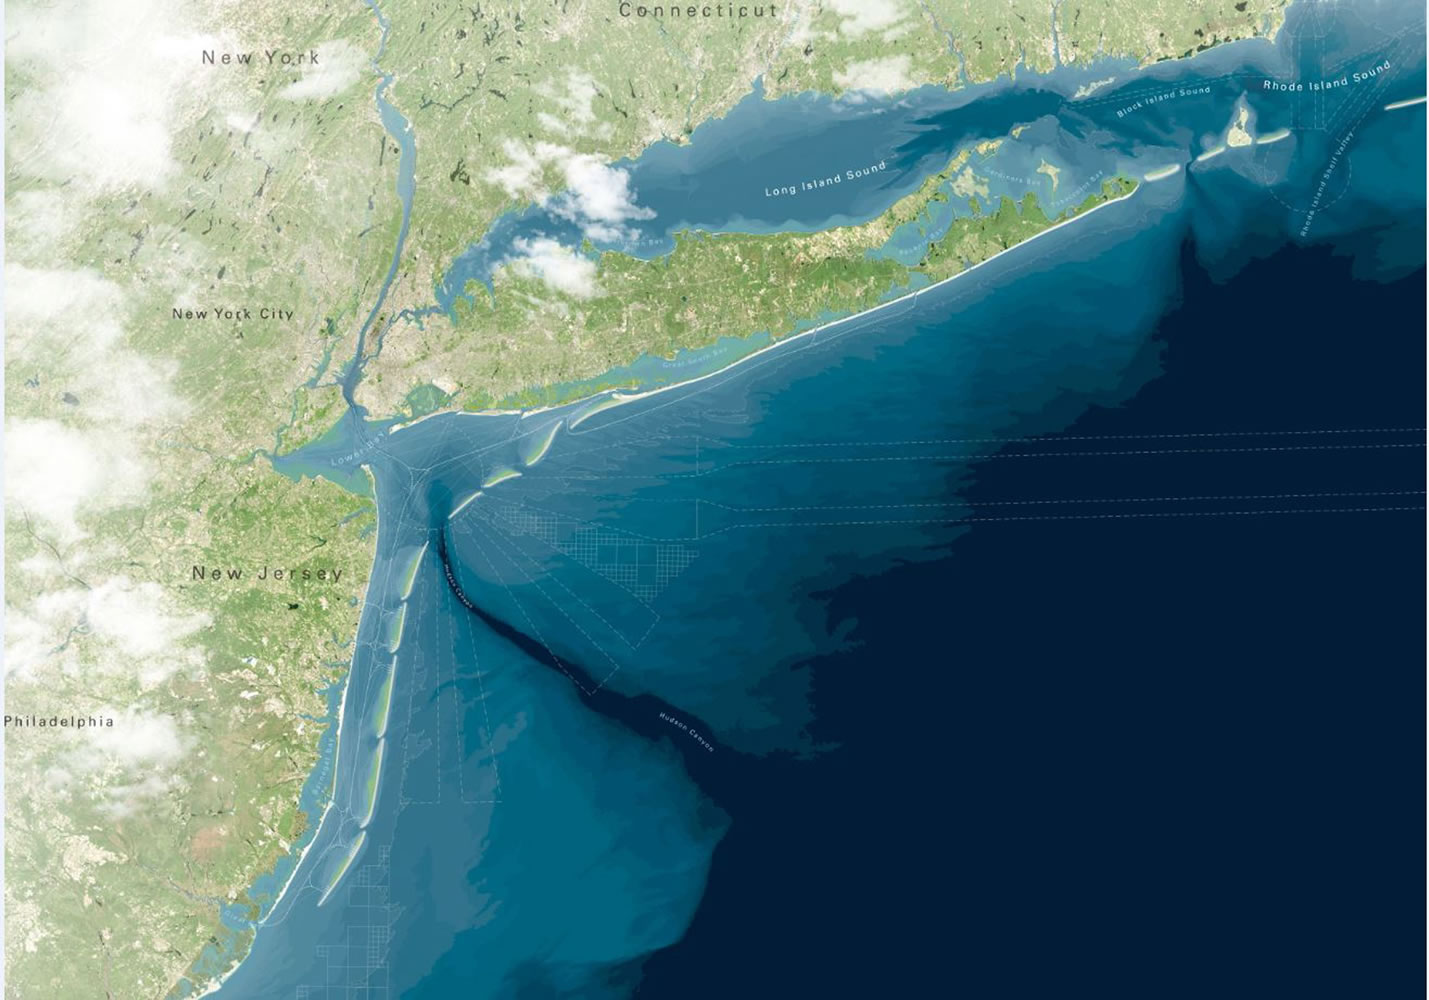 This artist rendering  shows a proposed  string of artificial barrier islands off the coast of New Jersey and New York to protect the shoreline from storm surges like the ones that caused billions of dollarsi worth of damage during Superstorm Sandy. The   $10 billion to $12 billion &quot;Blue Dunes&quot; project, conceived by New Jersey's Stevens Institute of Technology and two architectural firms, would stretch from central Long Island, N.Y., to the southern tip of Long Beach Island in New Jersey. Many logistical, political, financial and technical issues would have to be overcome before the project could be built. It is part of the Rebuild By Design contest being held by the U.S.